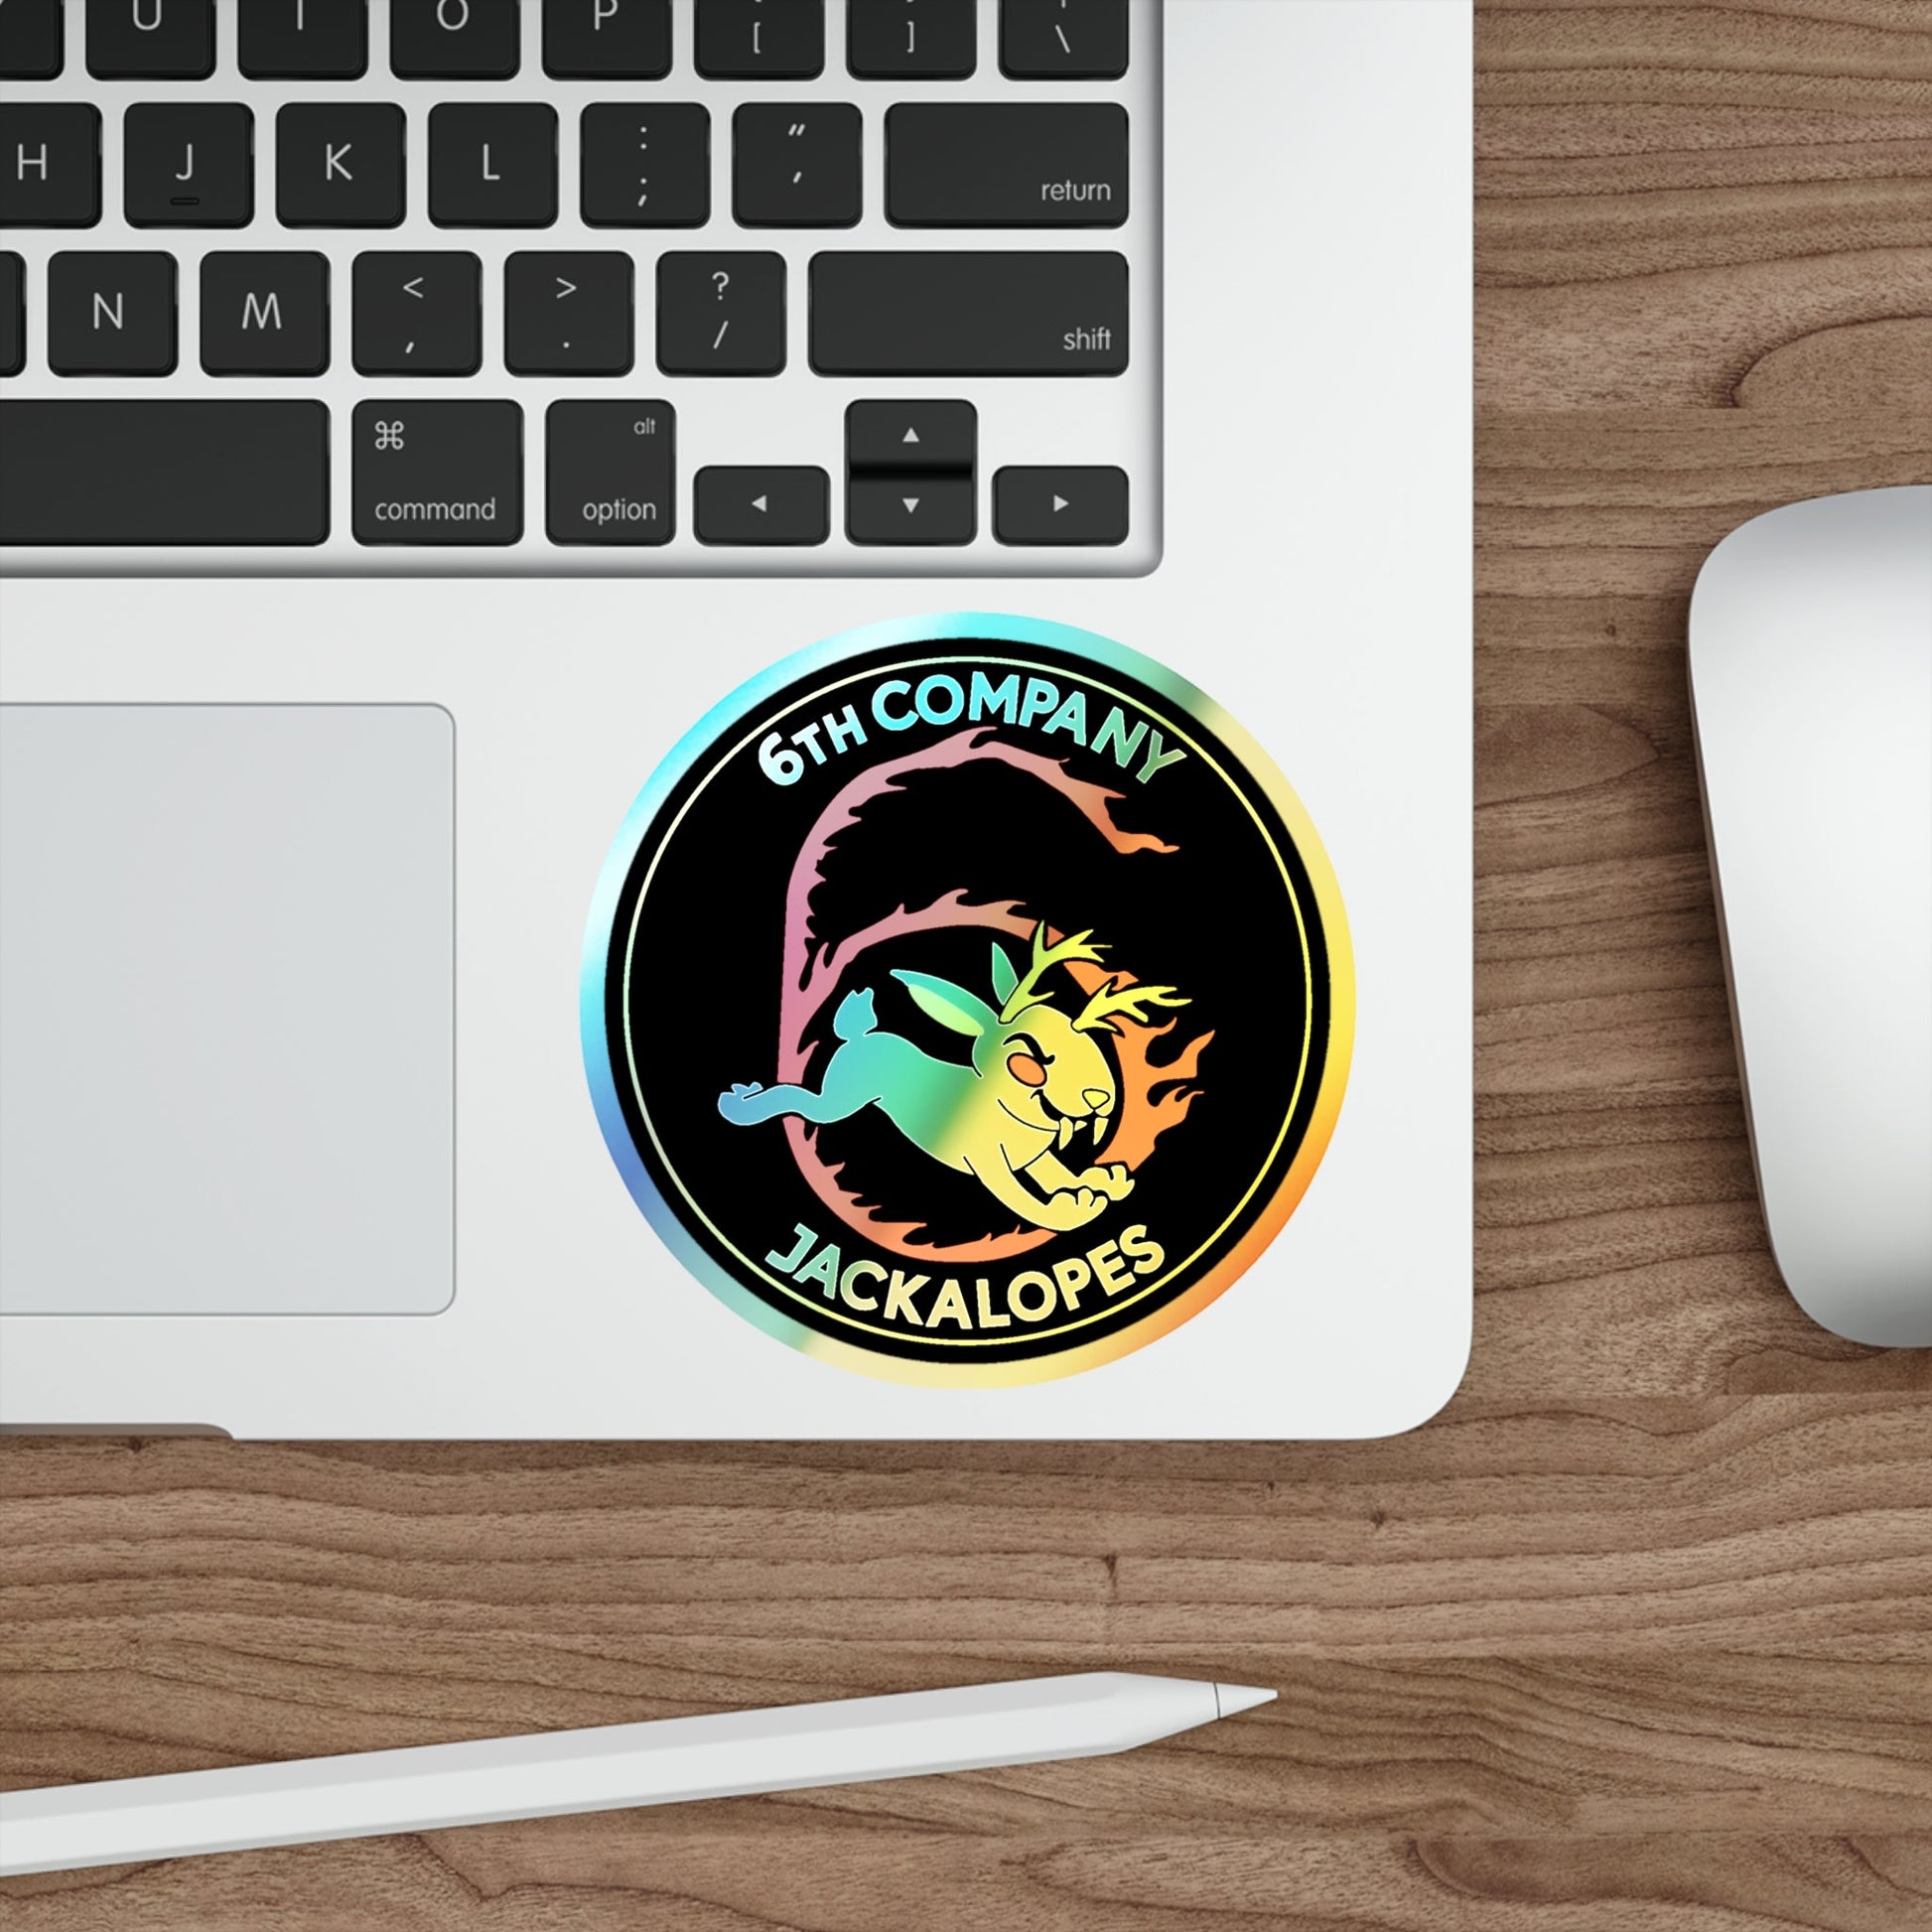 6TH COMPANY JACKALOPES (U.S. Navy) Holographic STICKER Die-Cut Vinyl Decal-The Sticker Space